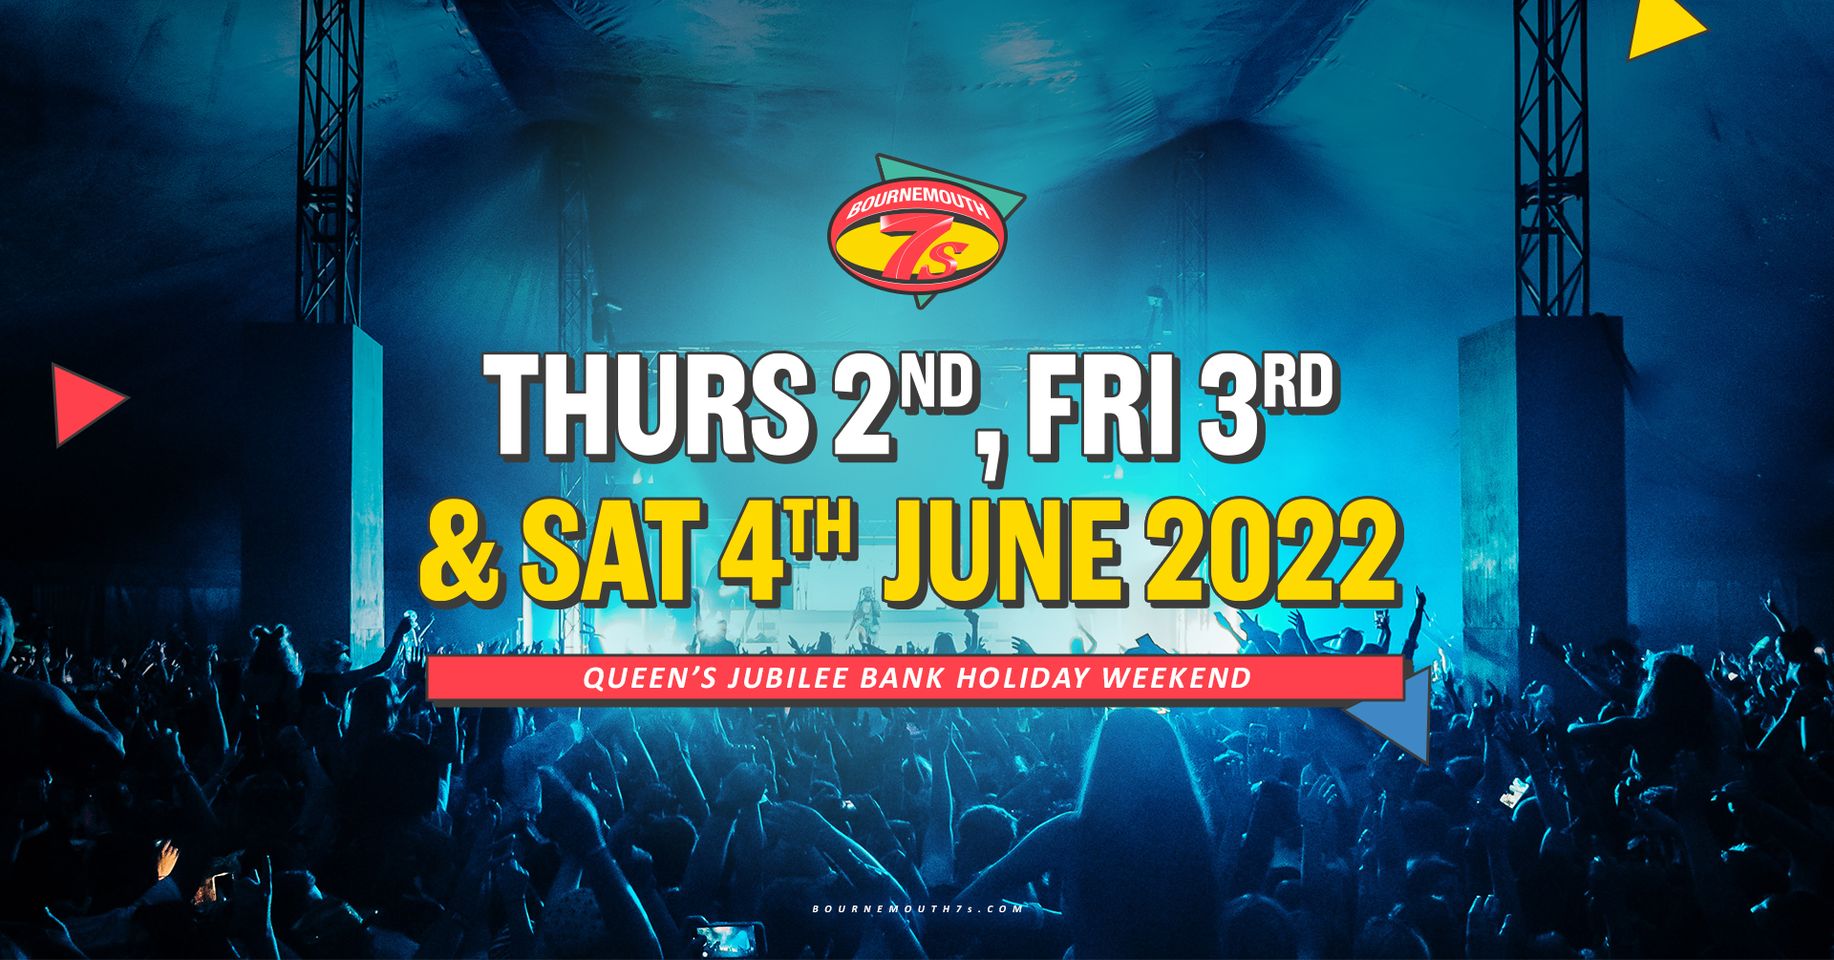  THE THEME FOR BOURNEMOUTH 7S FESTIVAL 2022 HAS BEEN REVEALED